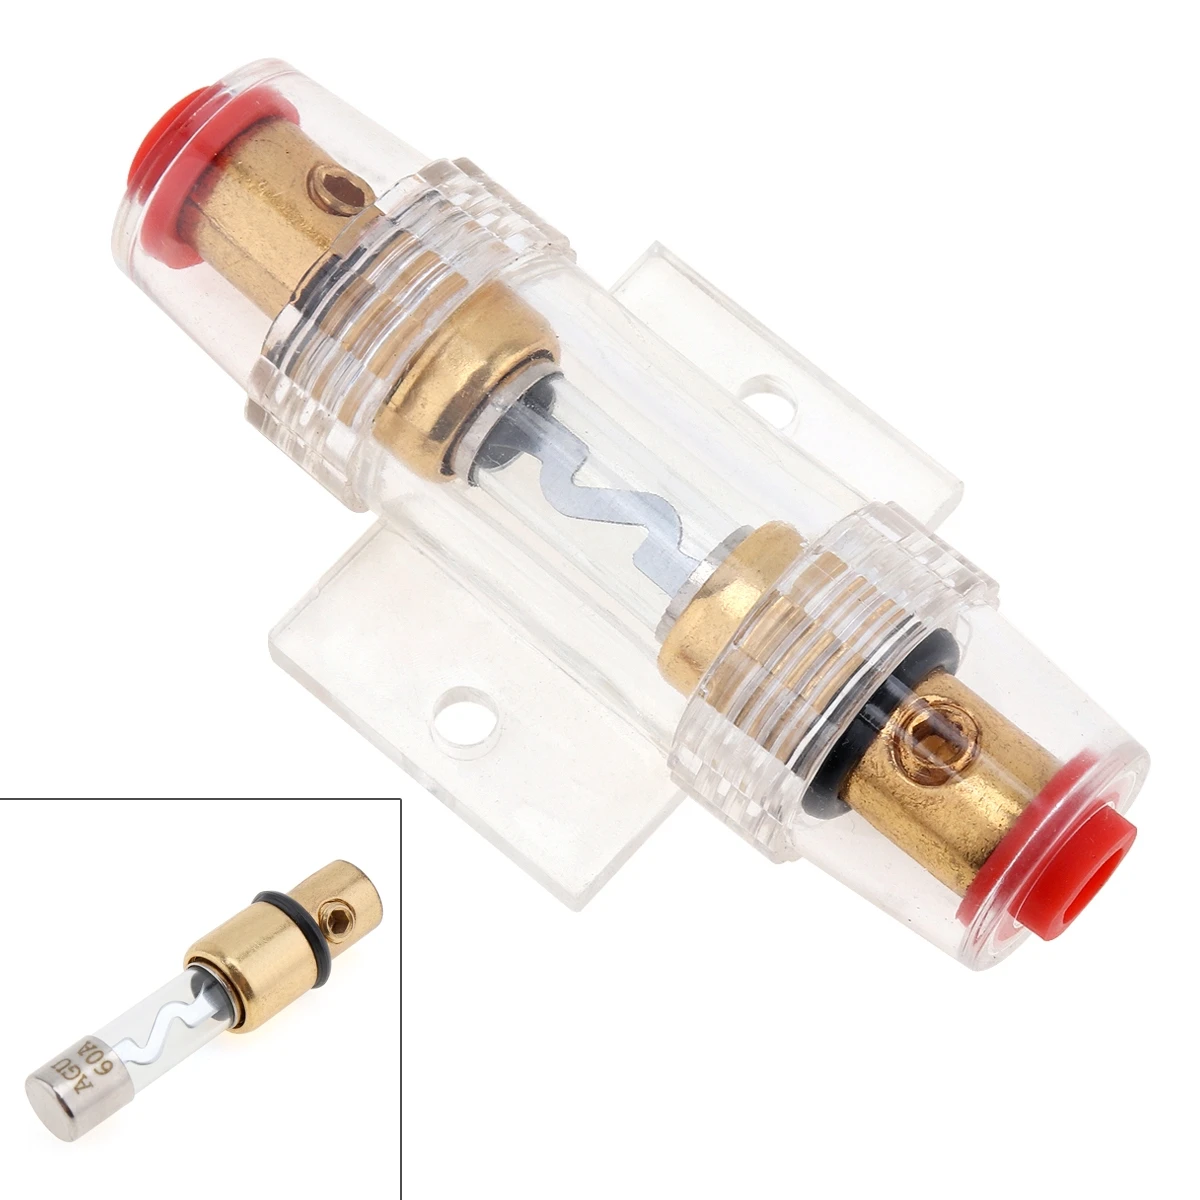 1pcs Car Audio Refit Fuse Holder 4/8 And 10 Gauge Wire With 60 AMP Fuses 60A/80A Fuse Holder For Car Stereo Audio Auto Amplifier